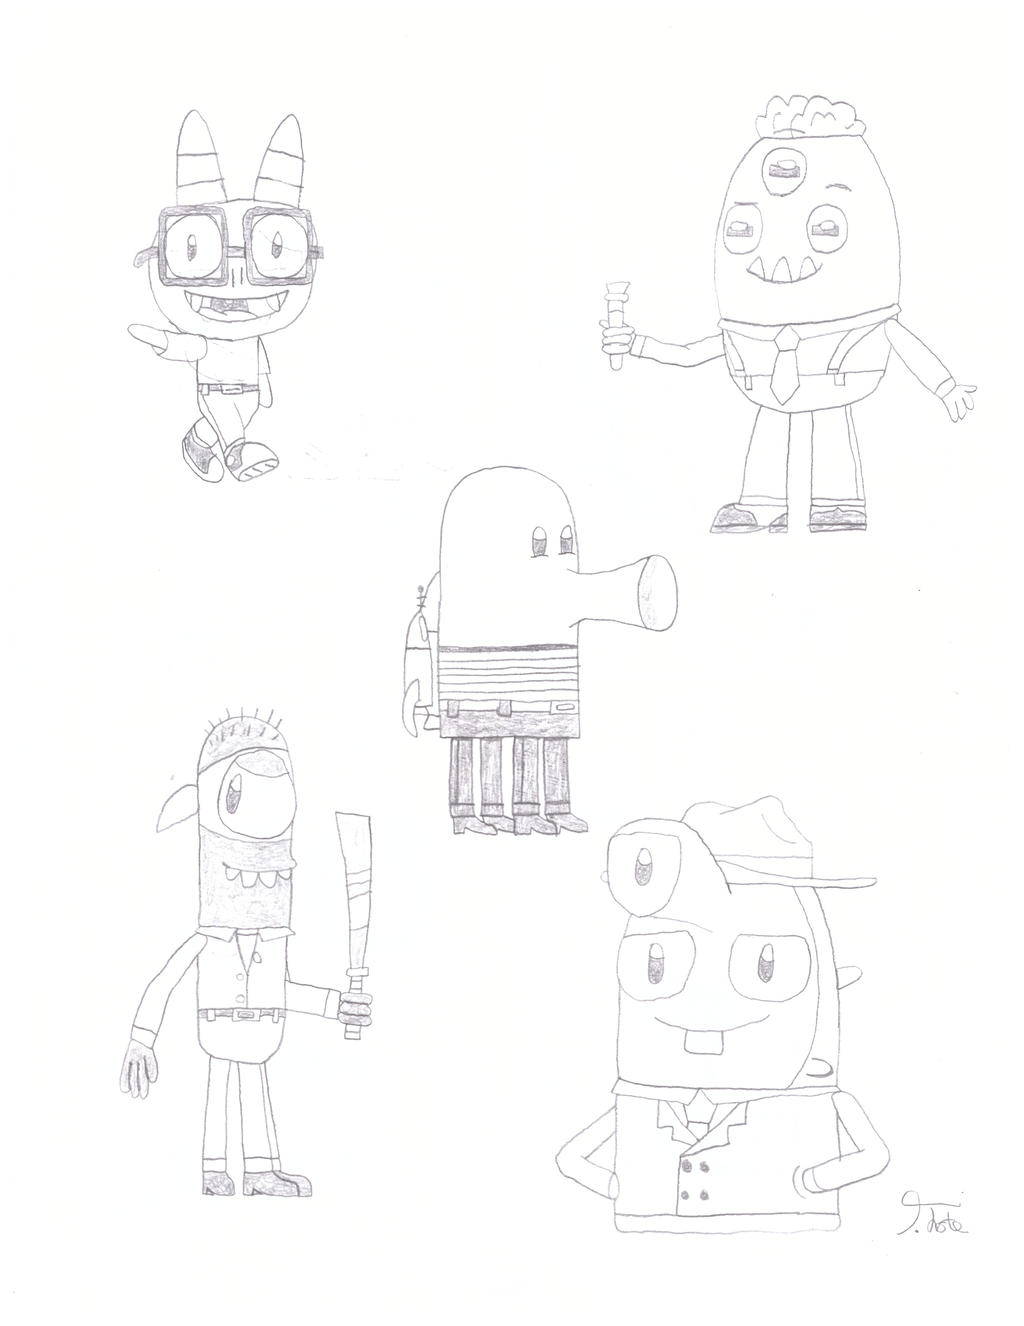 Doodle Jump Characters (1950s style and OC) by tarzanwothaz on DeviantArt